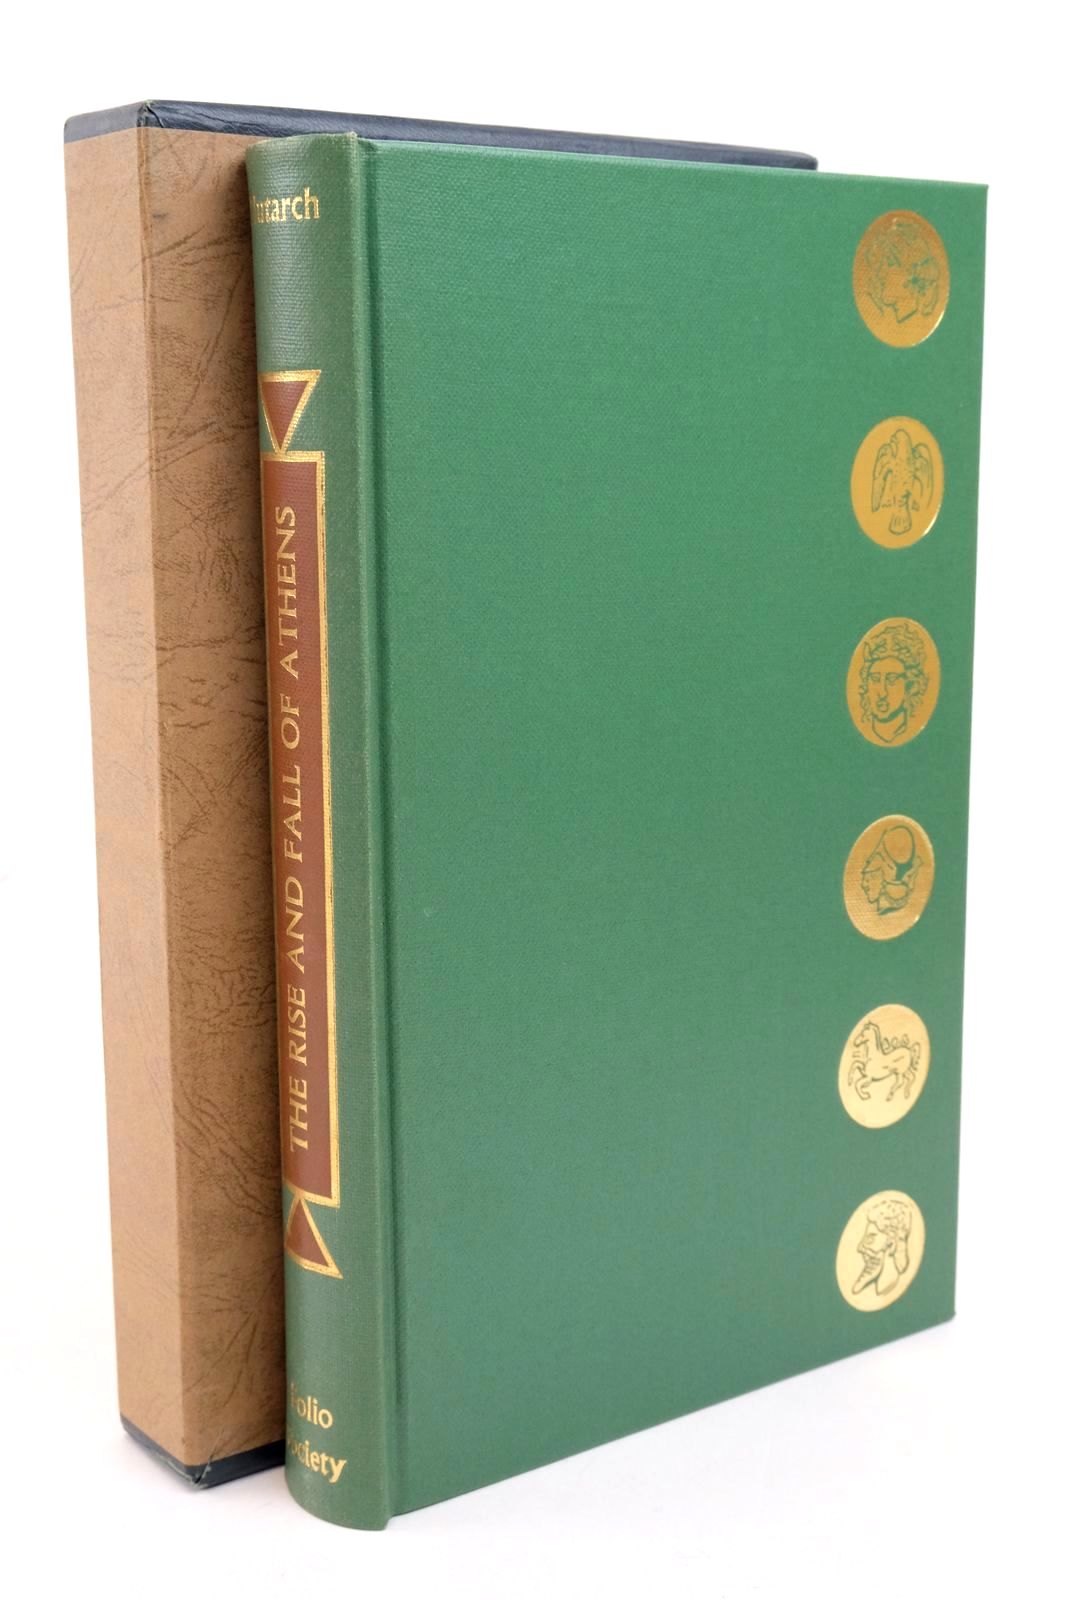 Photo of THE RISE AND FALL OF ATHENS written by Plutarch, Scott-Kilvert, Ian illustrated by Hawthorn, Raymond published by Folio Society (STOCK CODE: 1322893)  for sale by Stella & Rose's Books